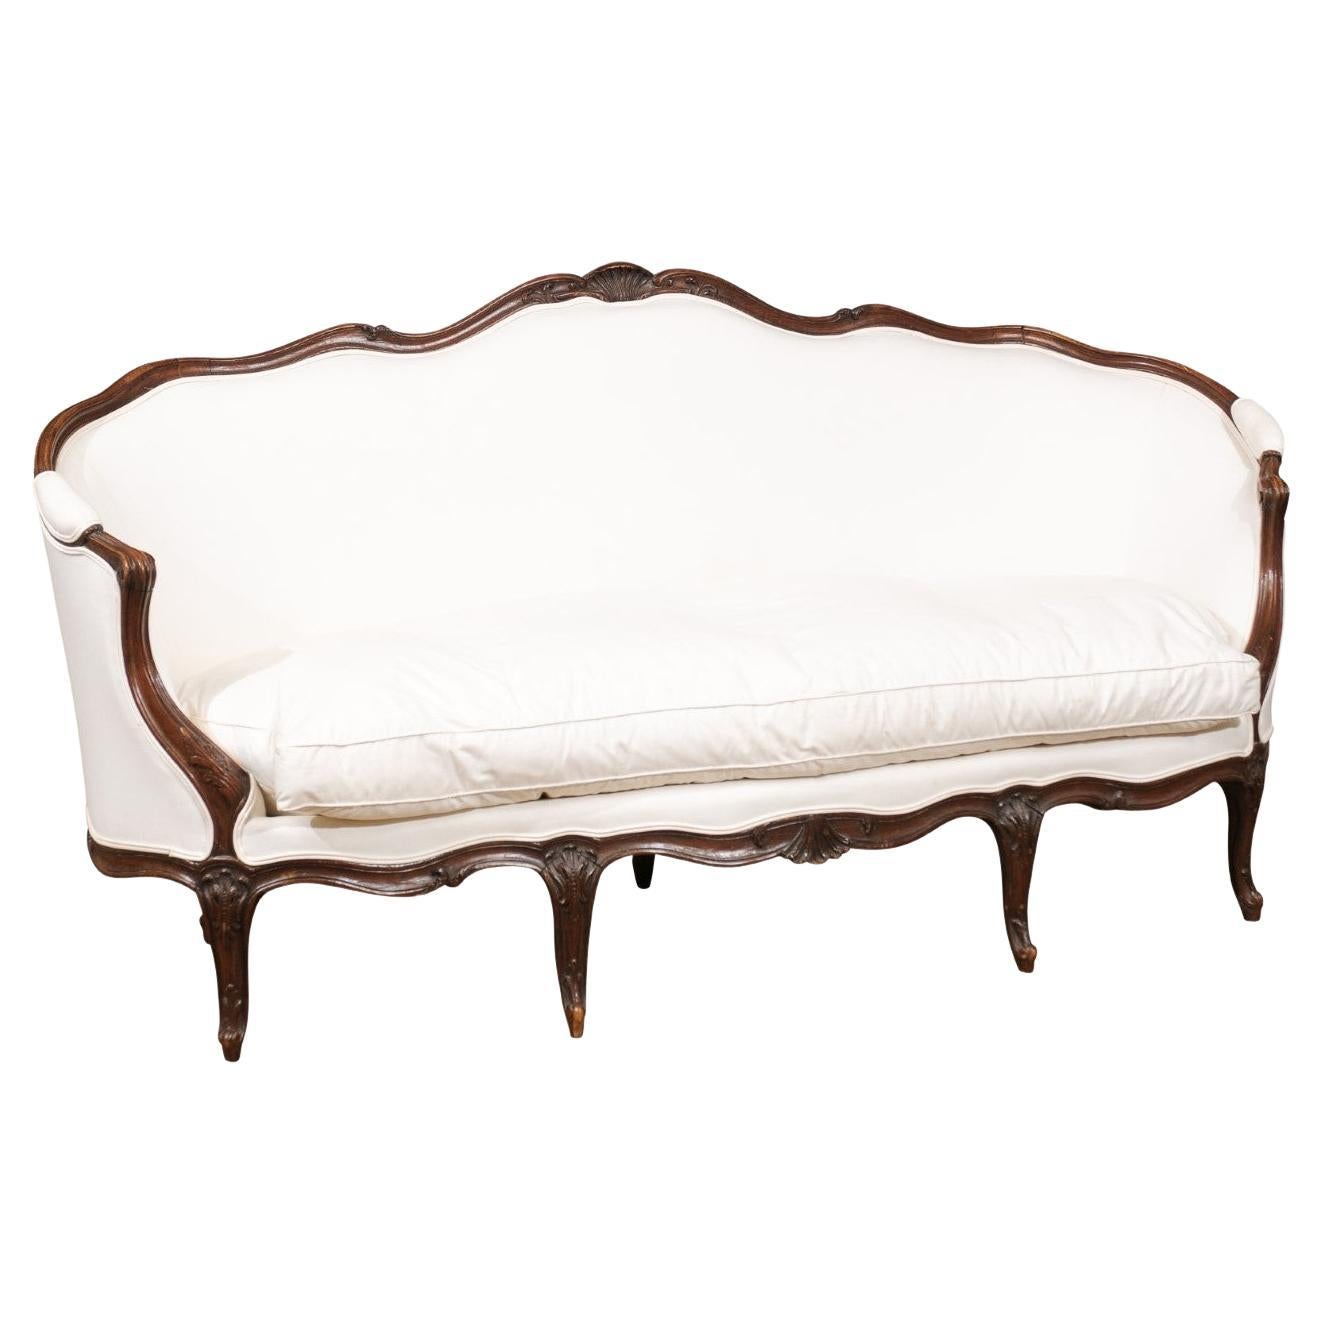 French Louis XV Style Walnut Upholstered Canapé with Wraparound Back, circa 1850 For Sale